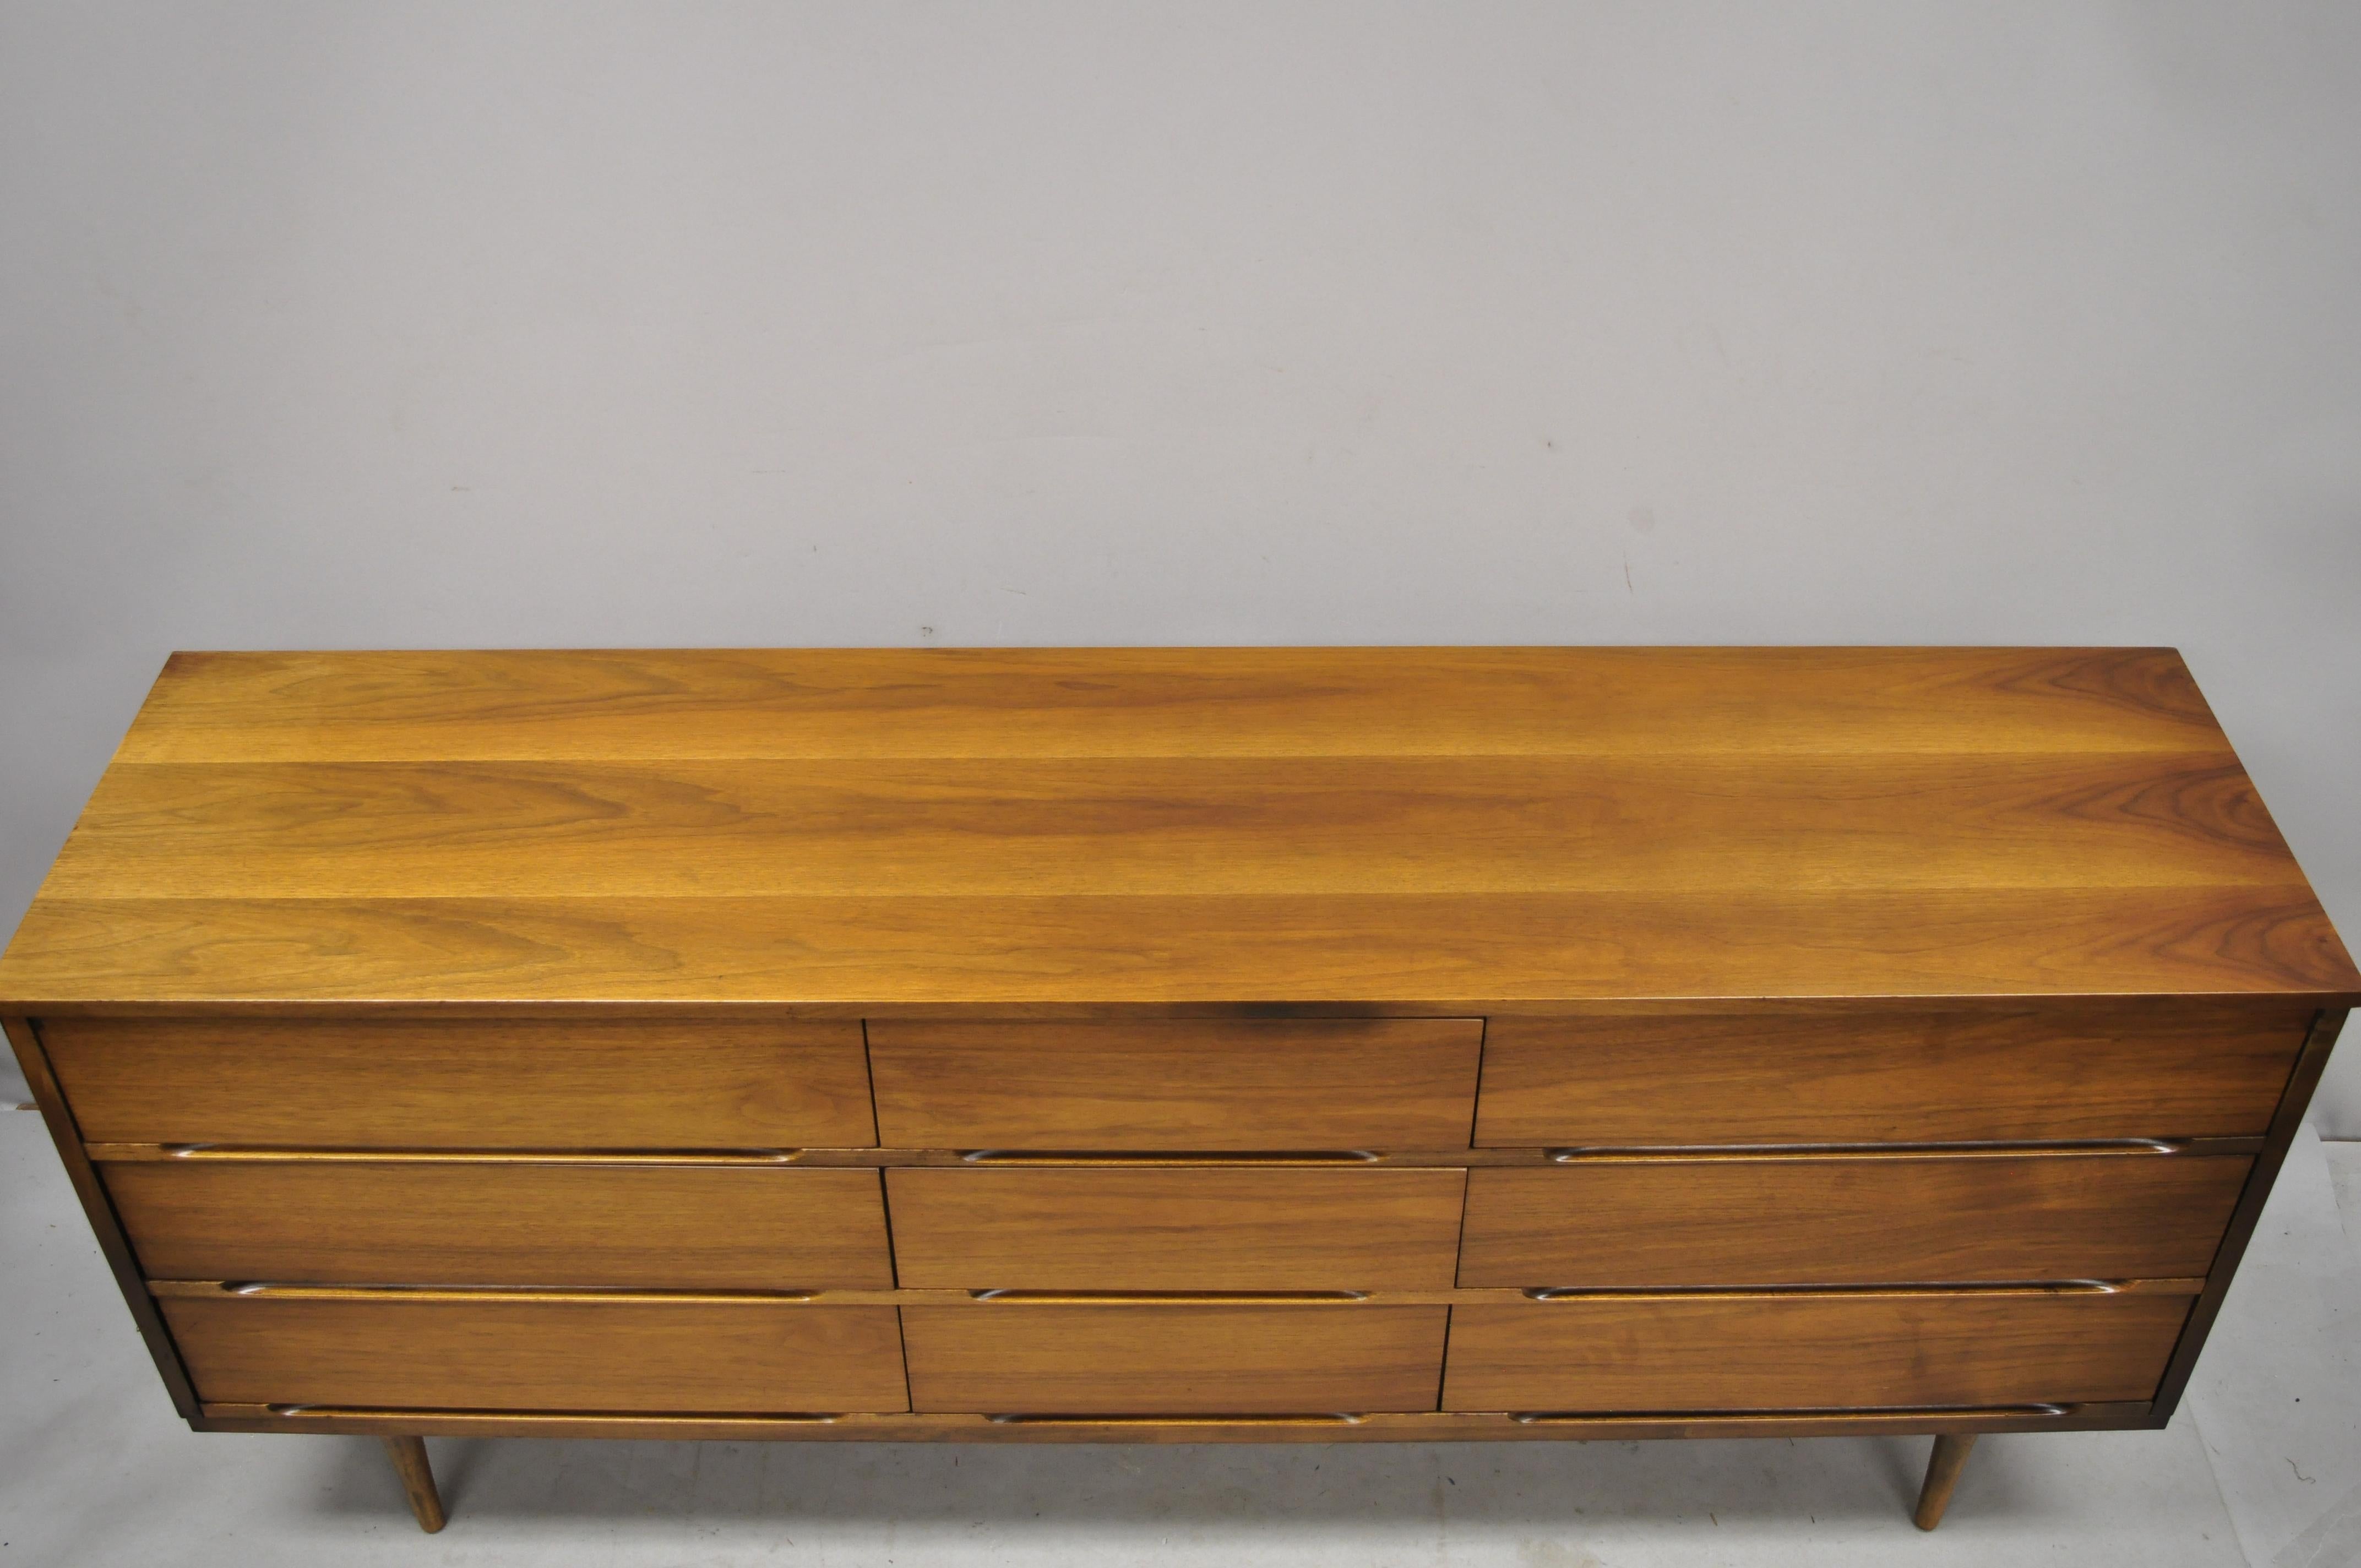 Mid-Century Modern walnut 9-drawer credenza long dresser by Coleman of Virginia. Item features beautiful wood grain, 9 dovetailed drawers, tapered legs, very nice vintage item, clean modernist lines, great style and form, circa mid-20th century.